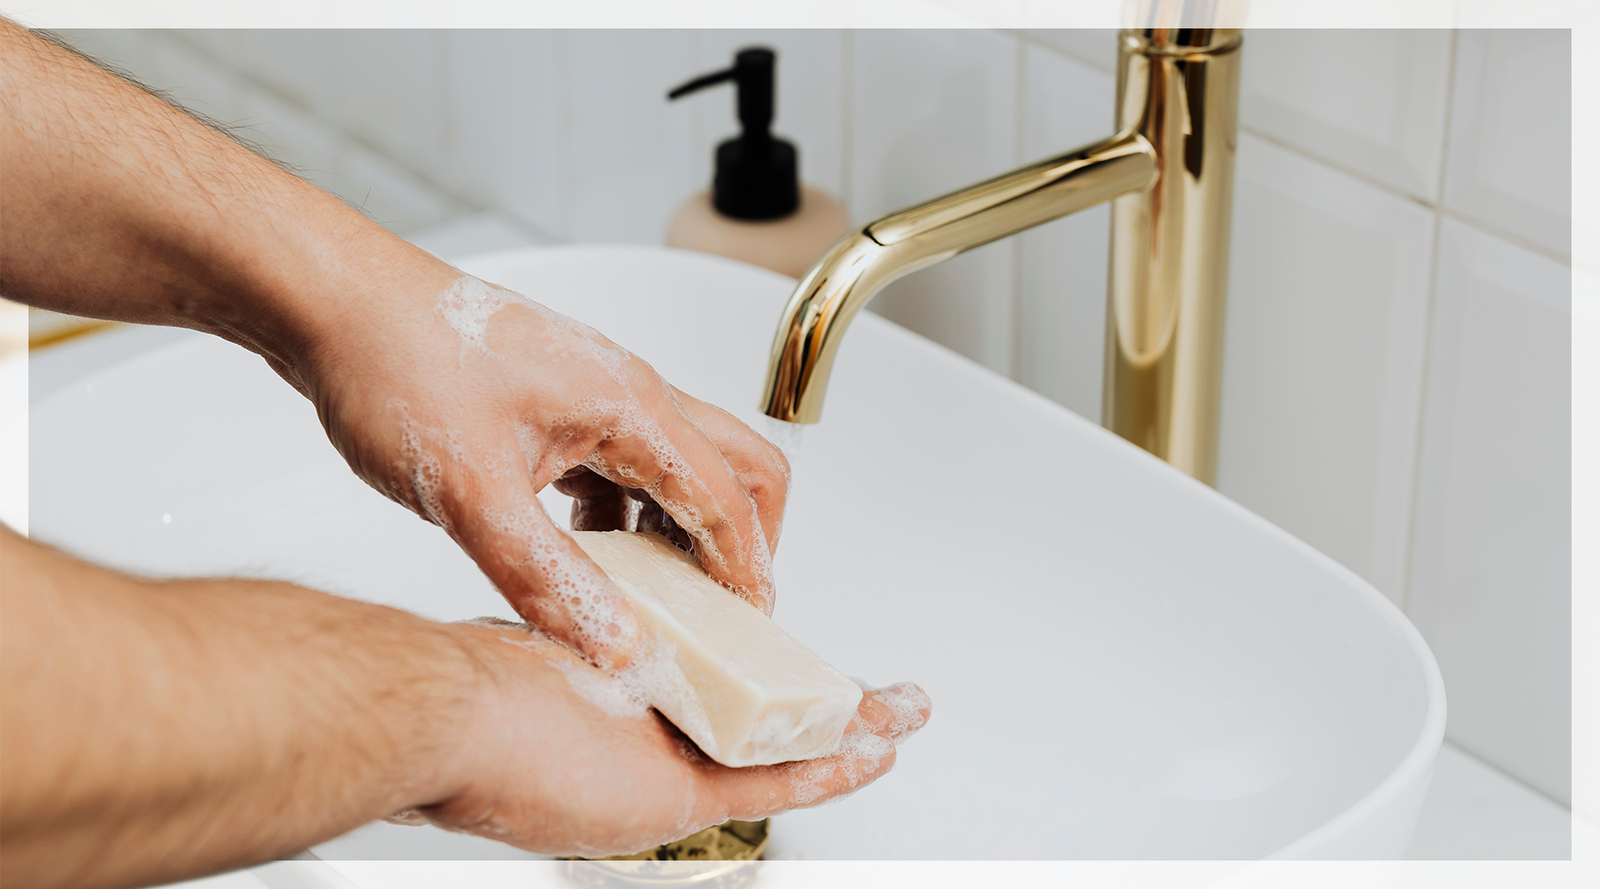 Is It Better To Use Bar Soap Or Liquid Hand Soap?